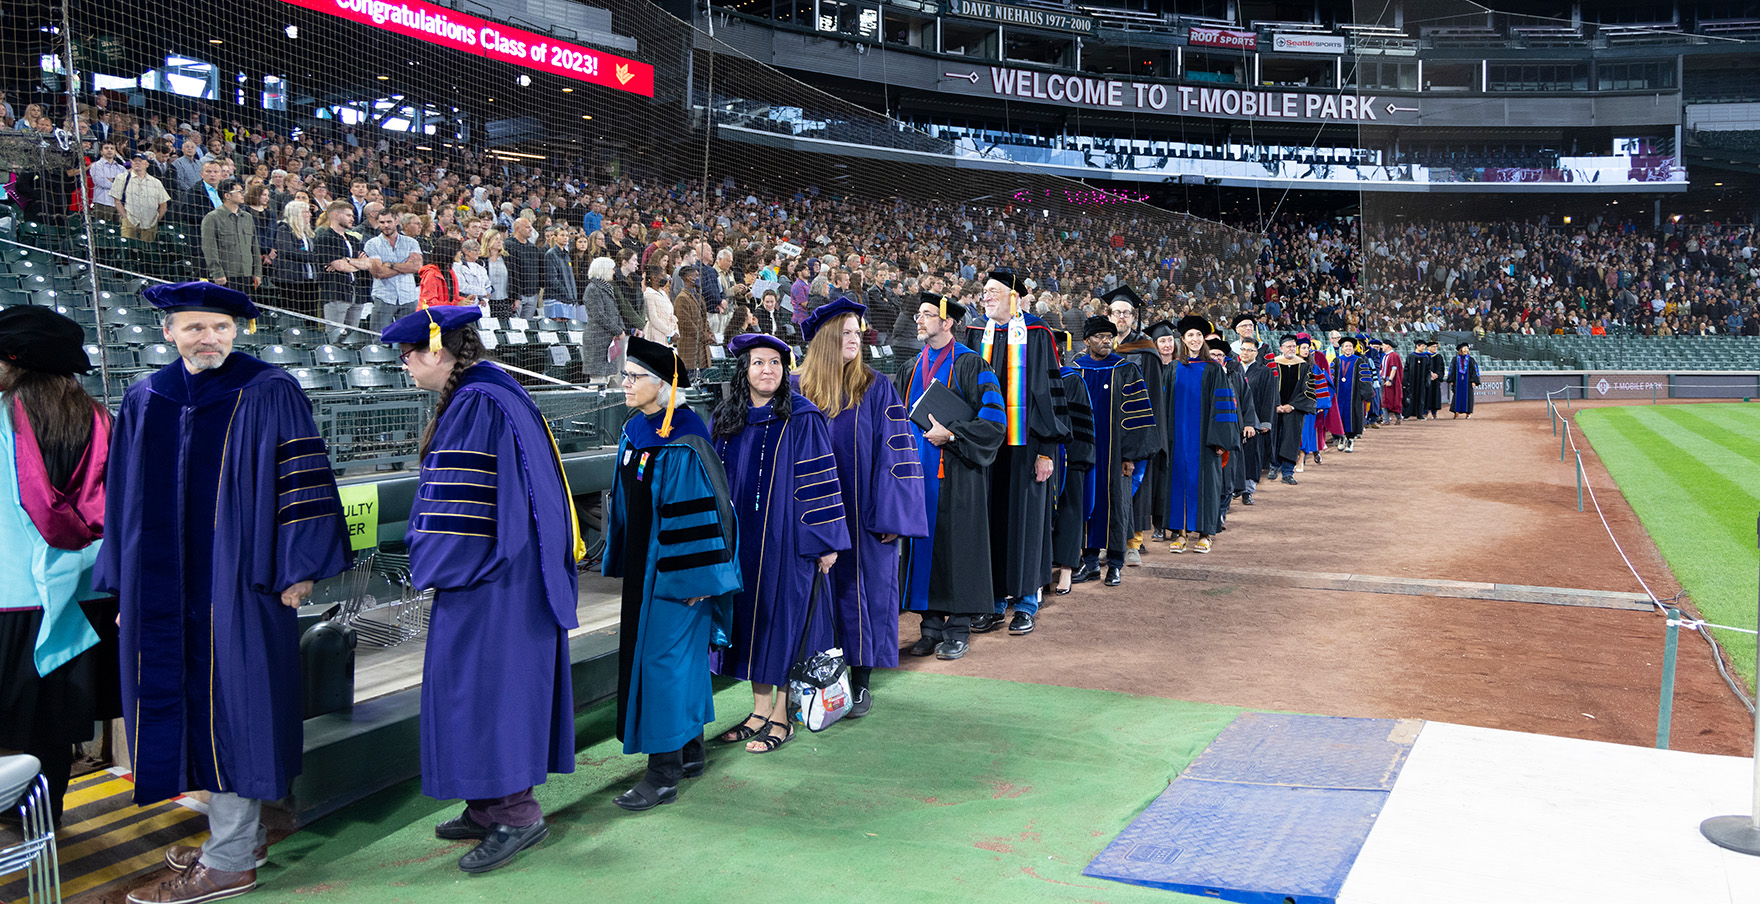 SPU faculty file into T-mobile Park | photo by Mike Siegel